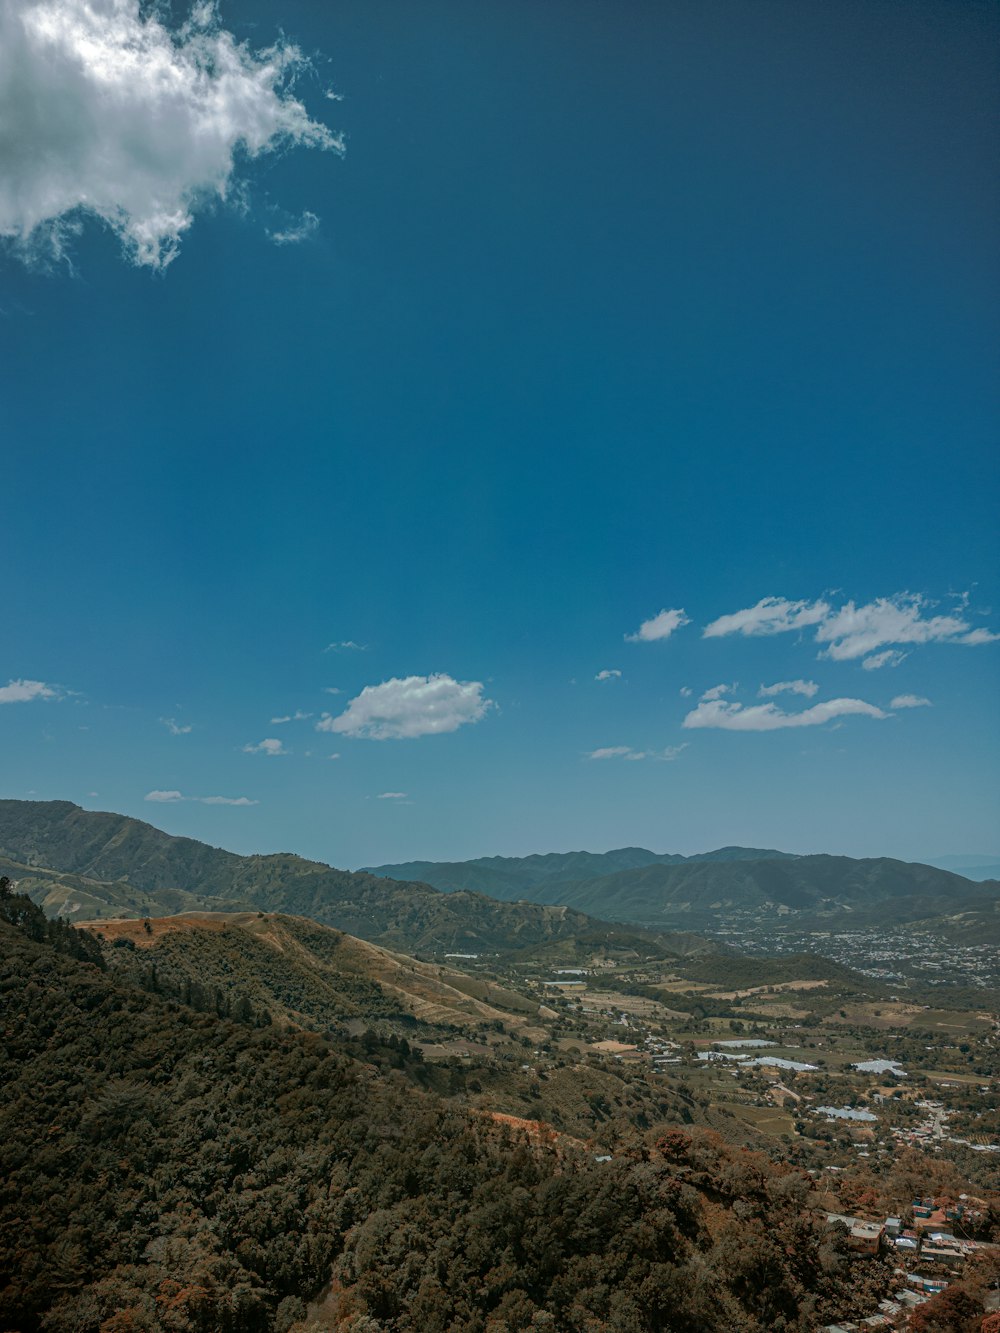 a scenic view of a valley and mountains under a blue sky